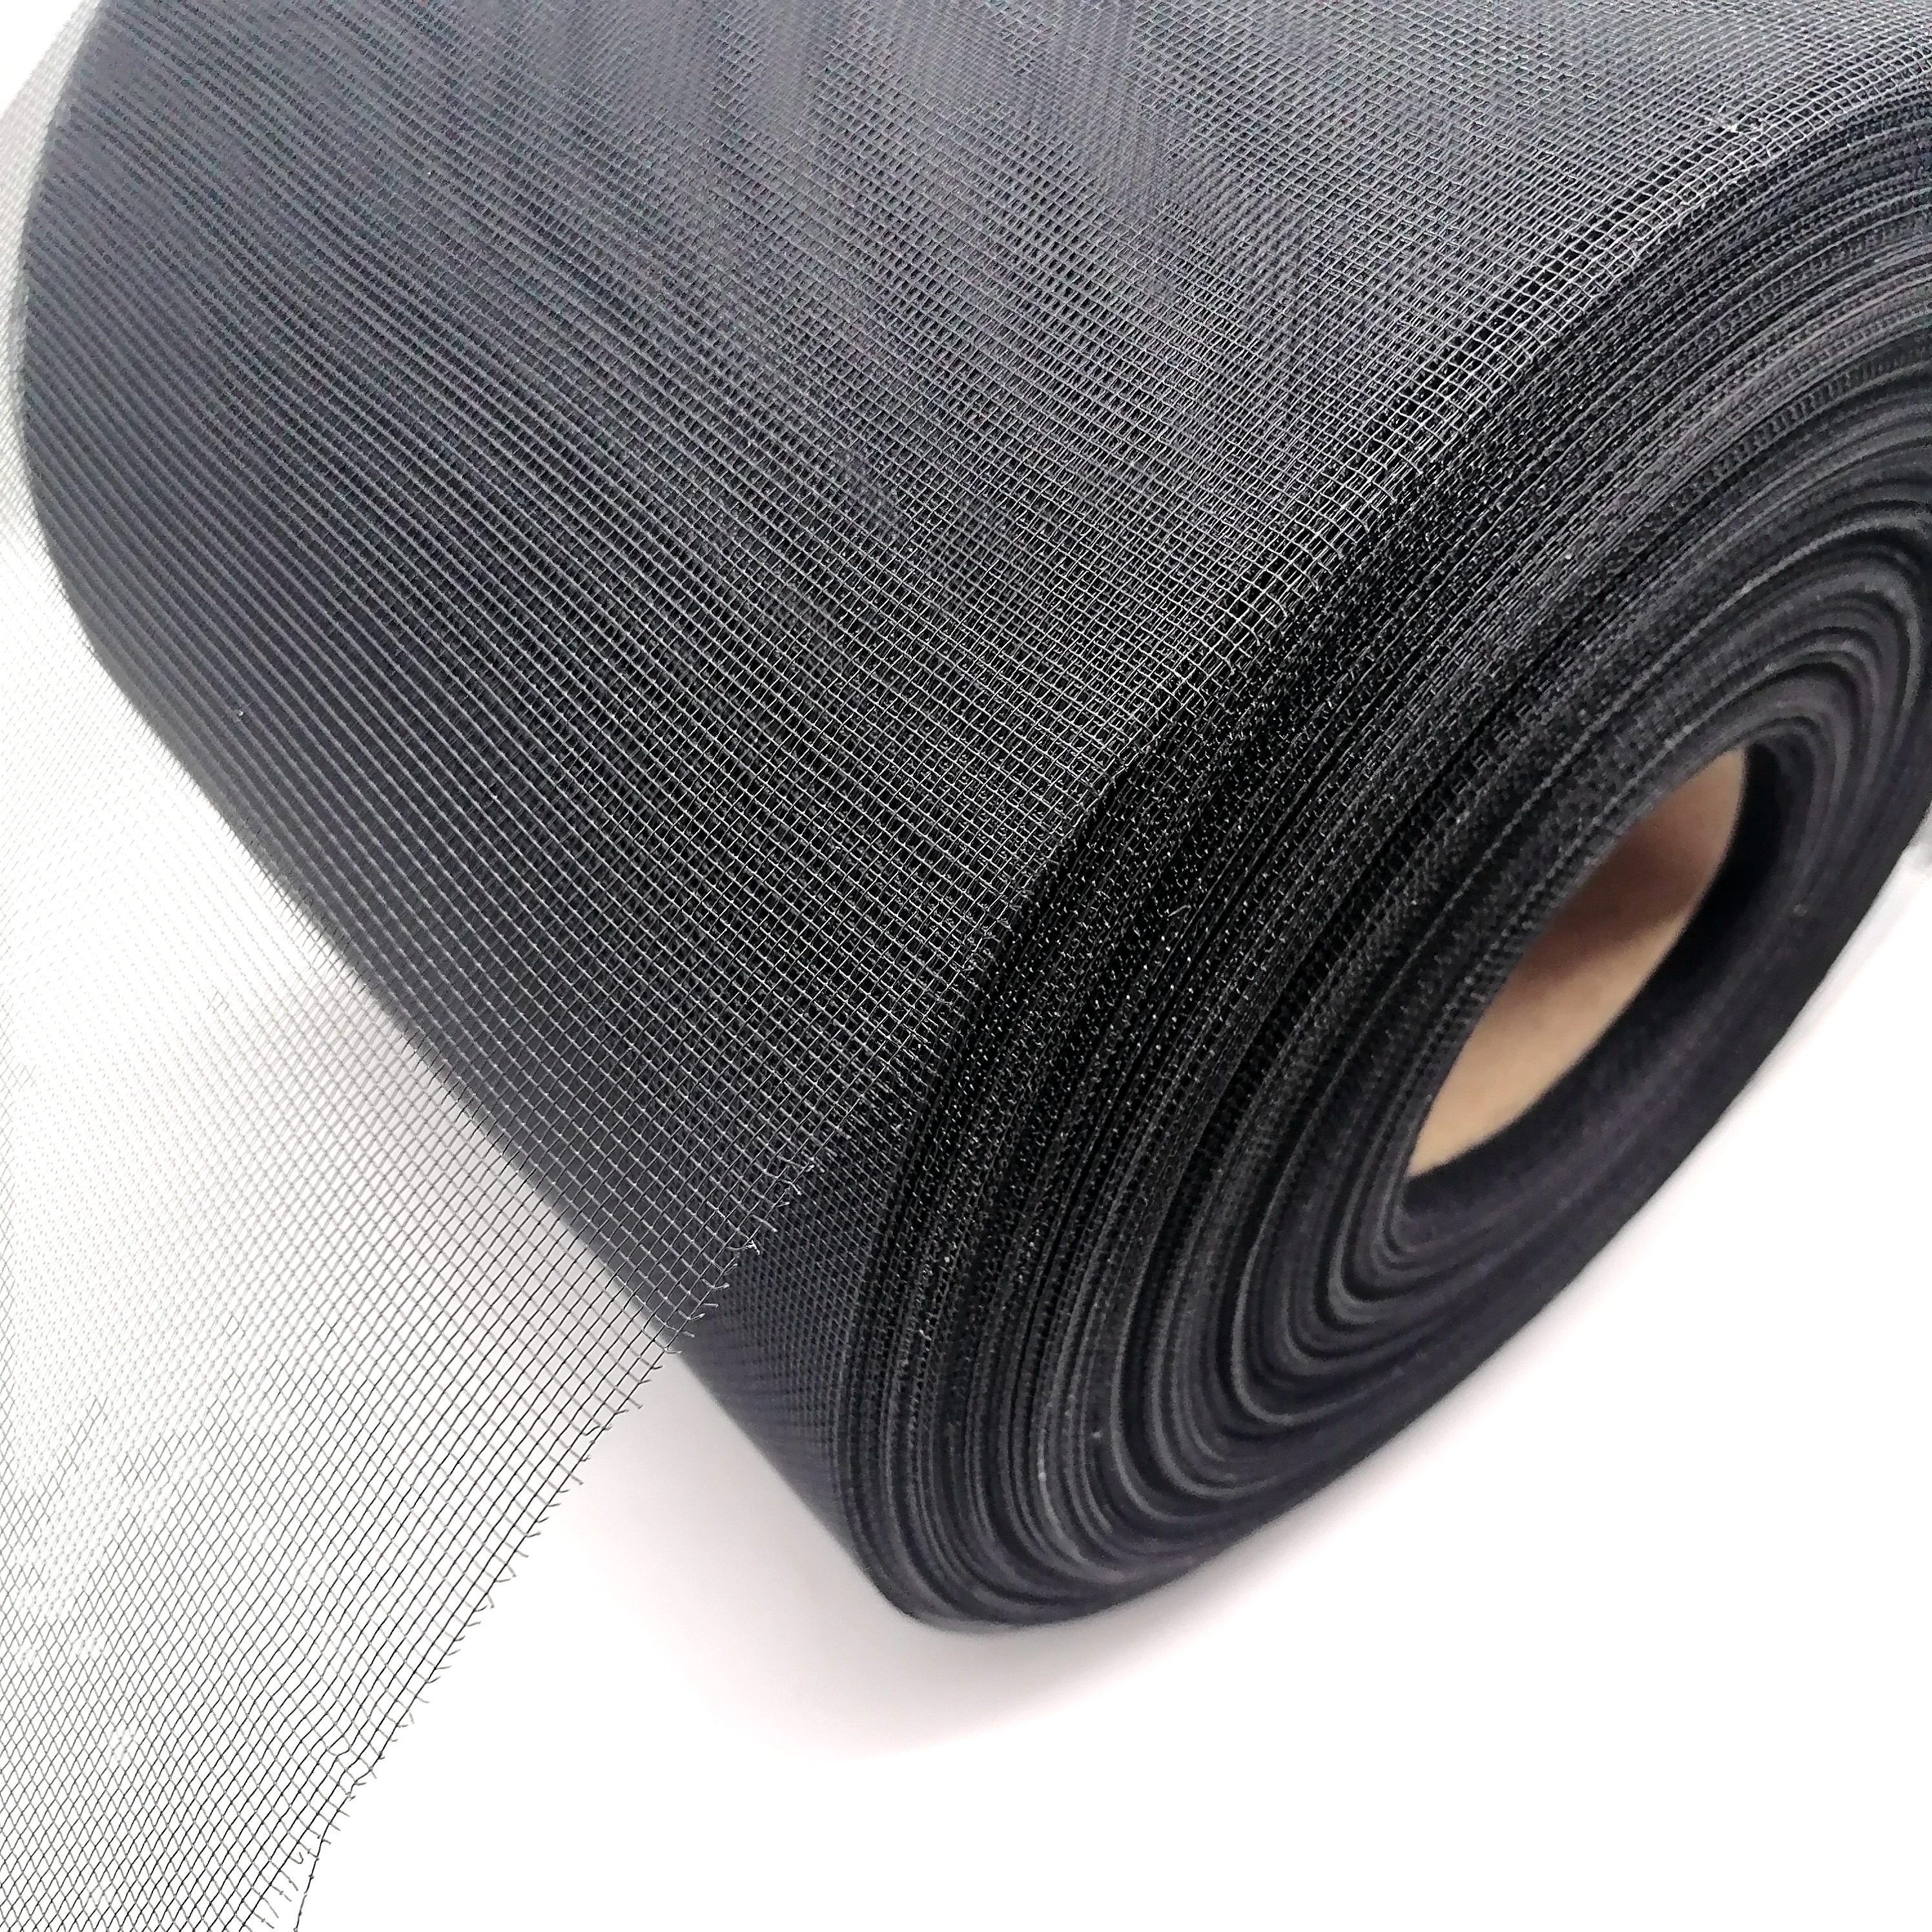 Do you know epoxy coated wire mesh?